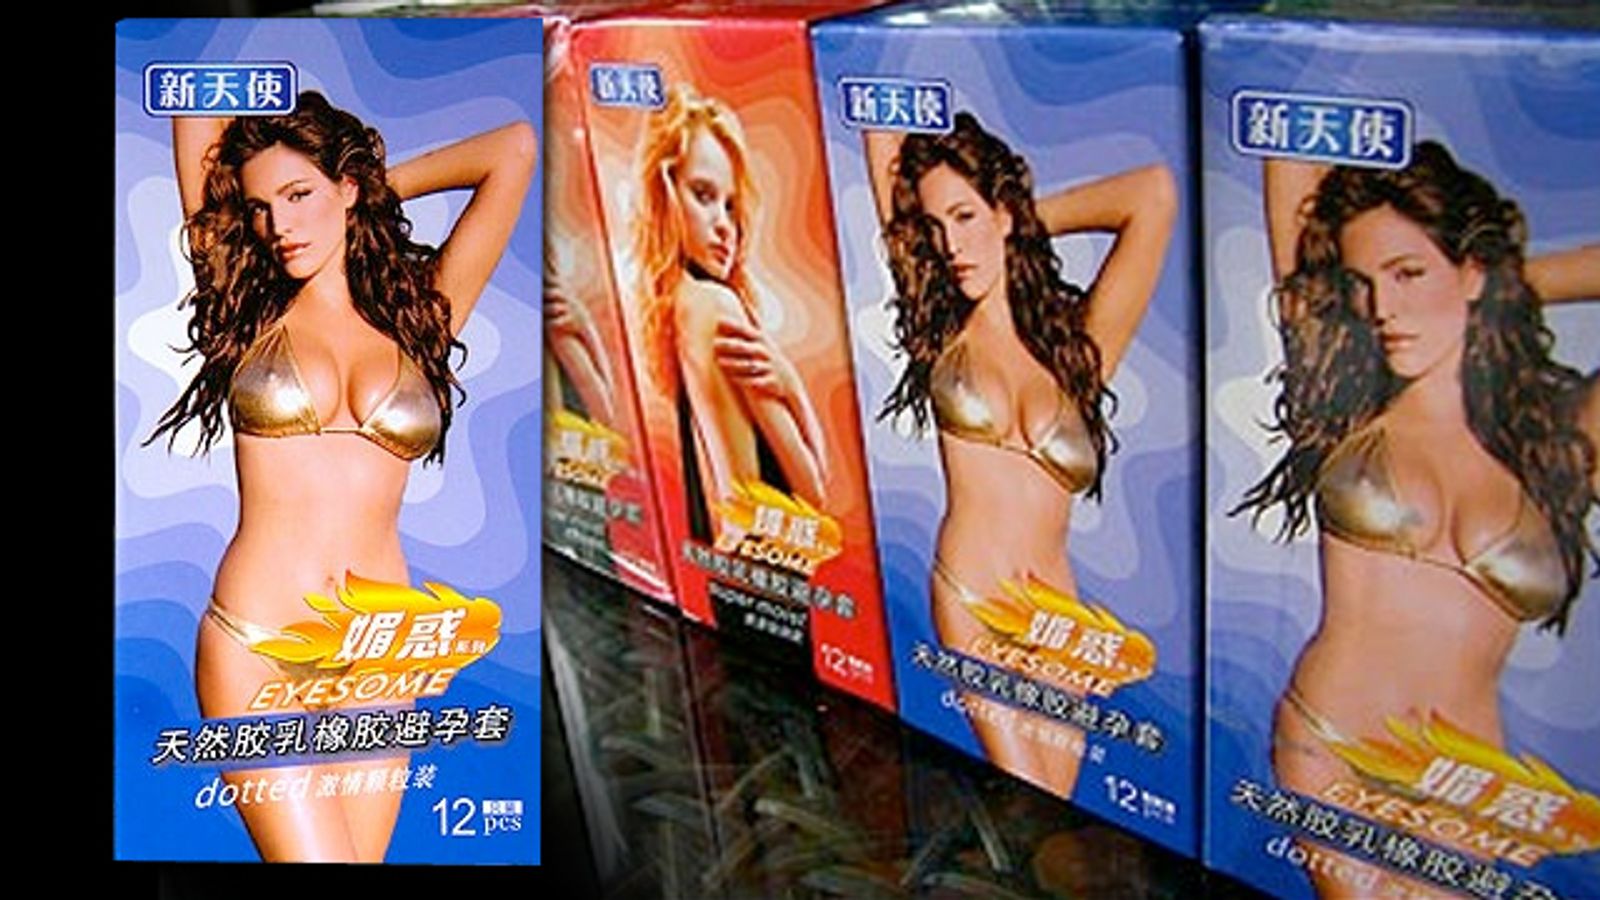 Chinese Use Unauthorized Celeb Pix to Sell Condoms